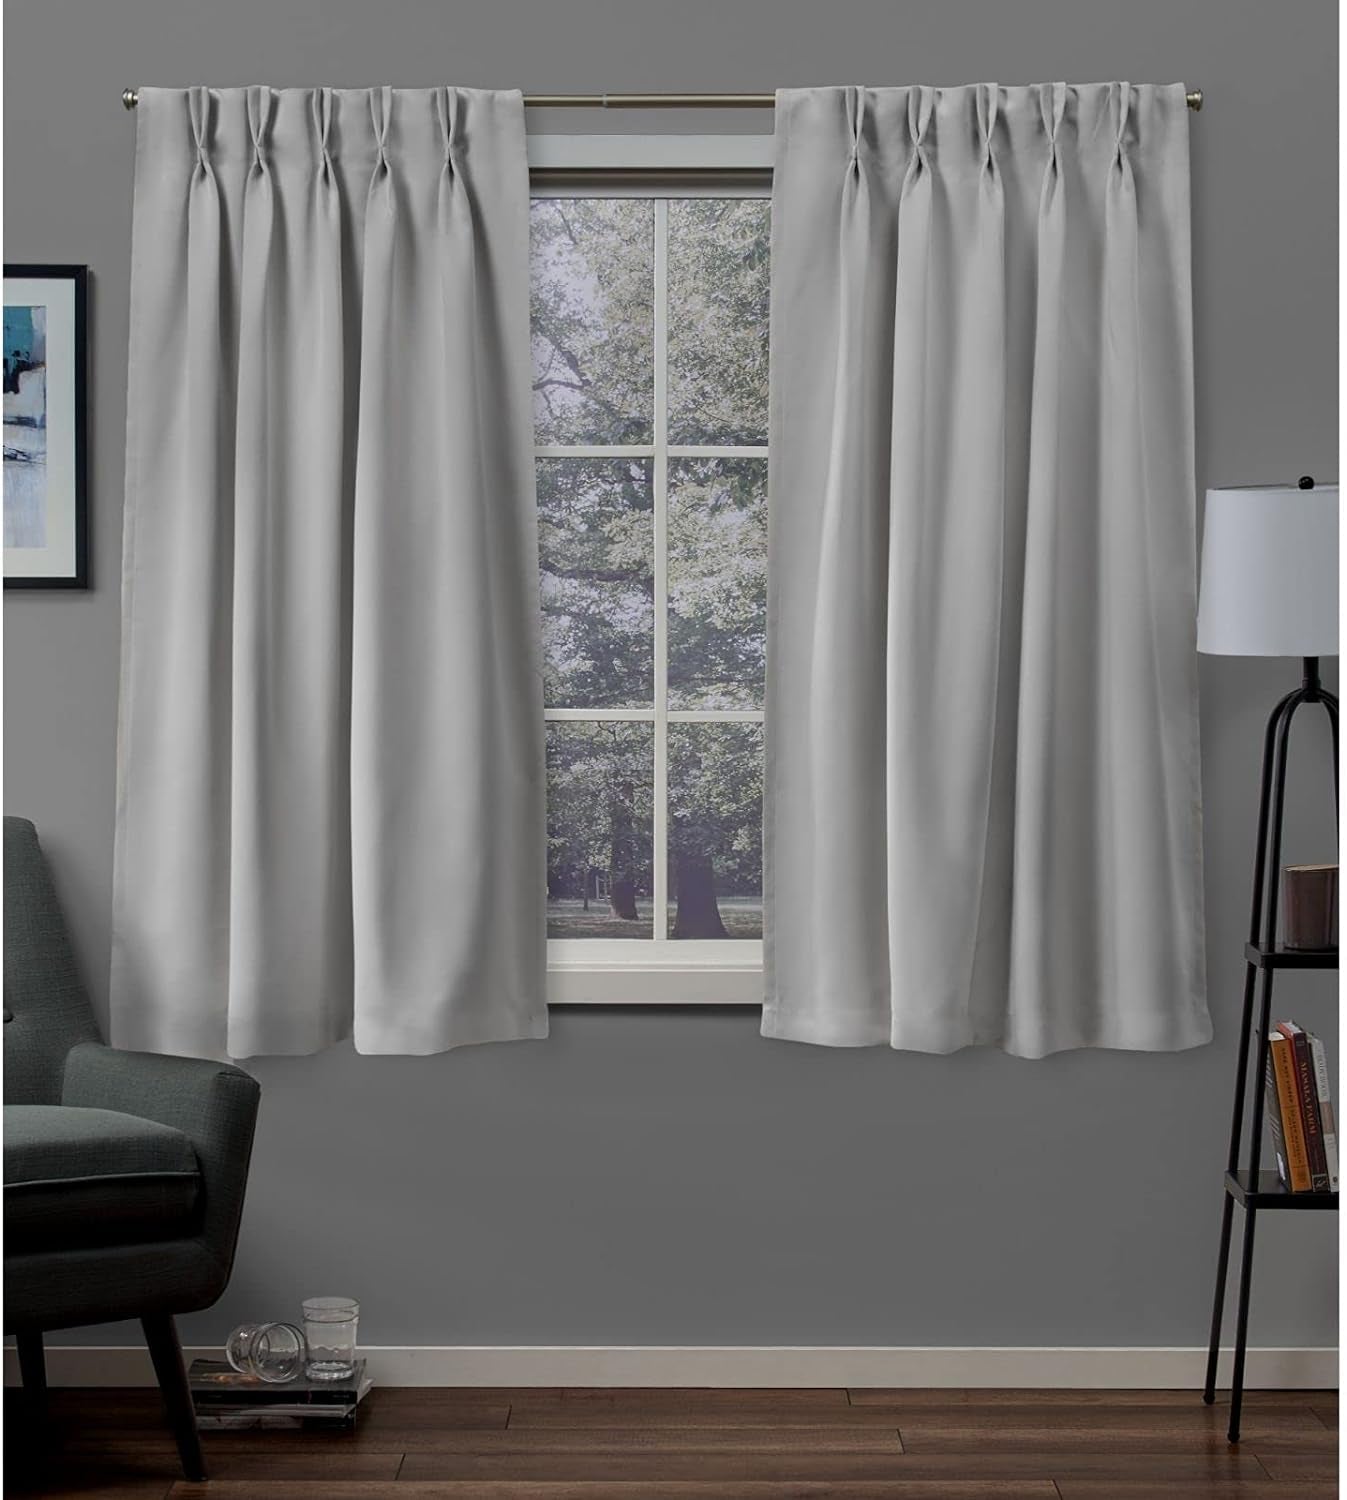 Exclusive Home Sateen Twill Woven Room Darkening Blackout Pinch Pleat/Hidden Tab Top Curtain Panel Pair, 108" Length, Vanilla  Exclusive Home Curtains Silver 63" Length 